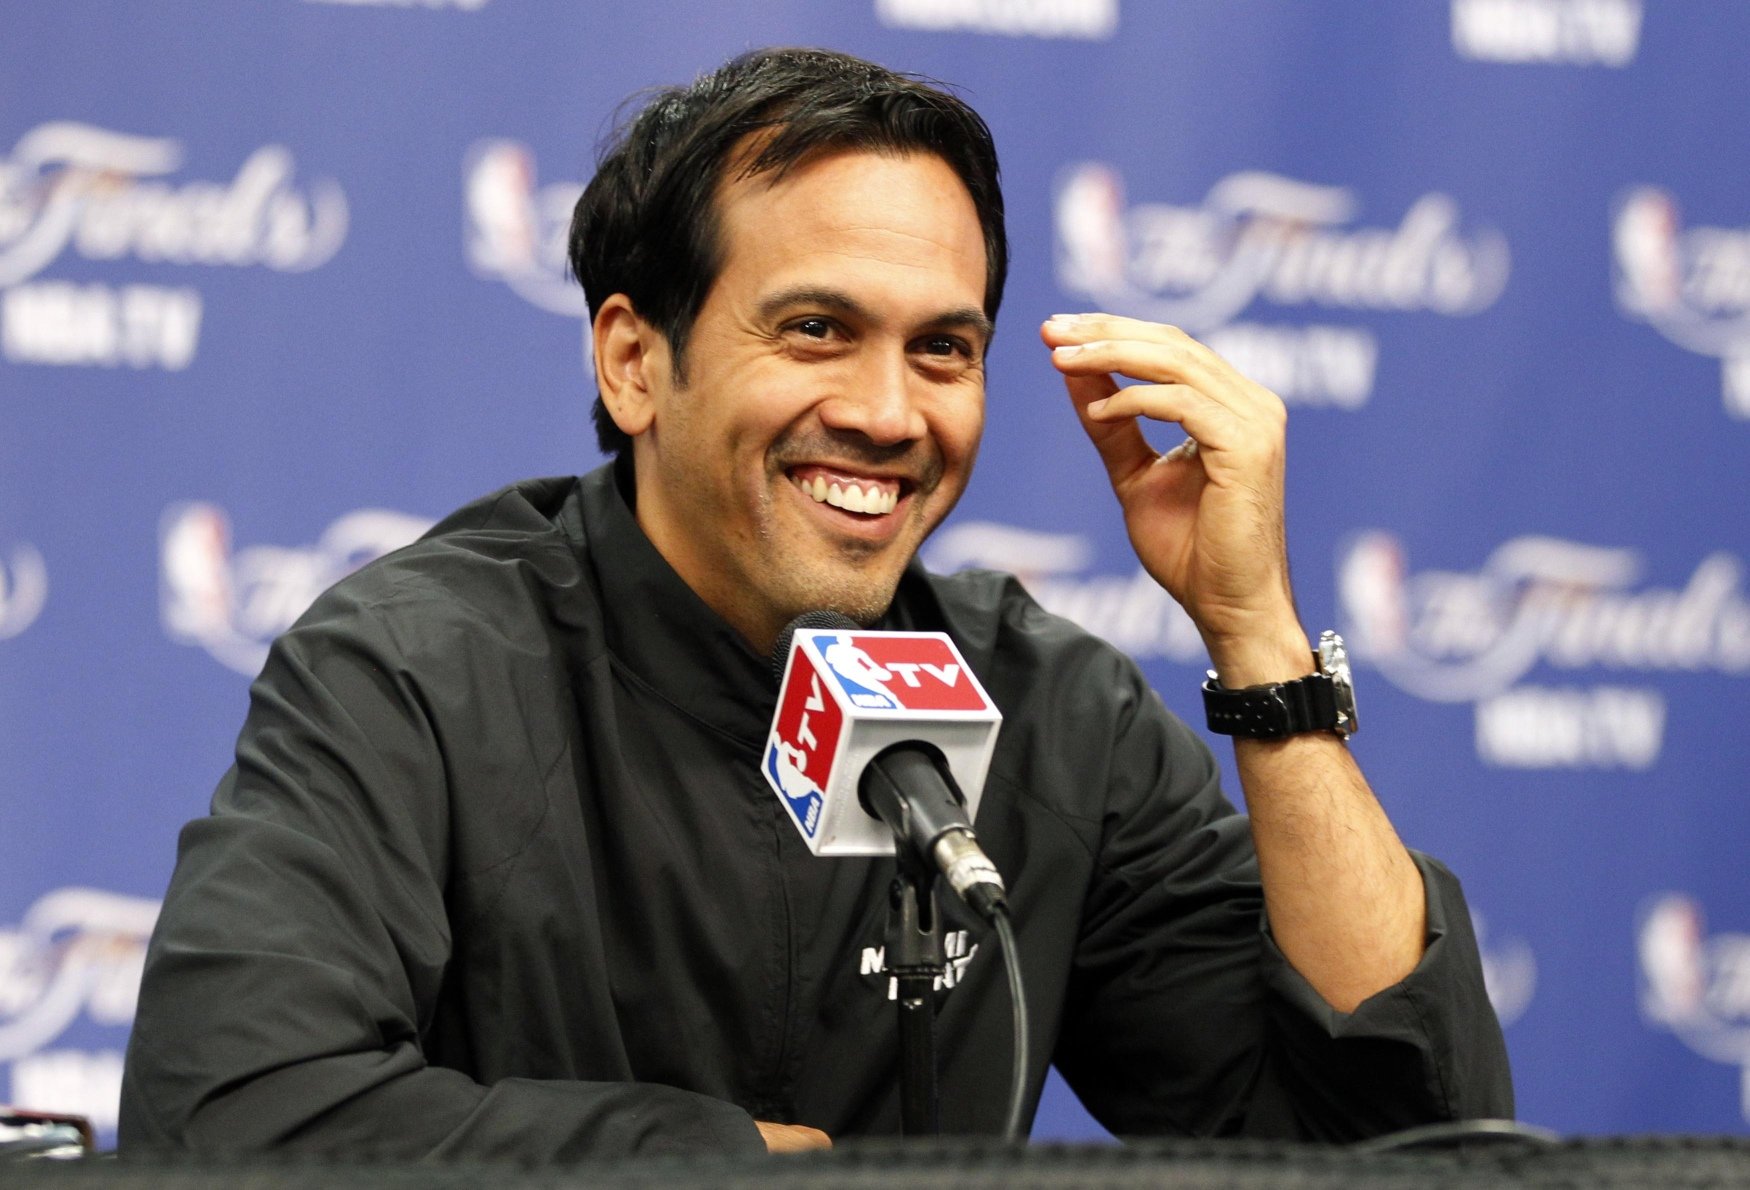 Miami Heat head coach Erik Spoelstra responds to a question during a news conference for the NBA Finals basketball playoff series in San Antonio, Texas. Photo: Reuters